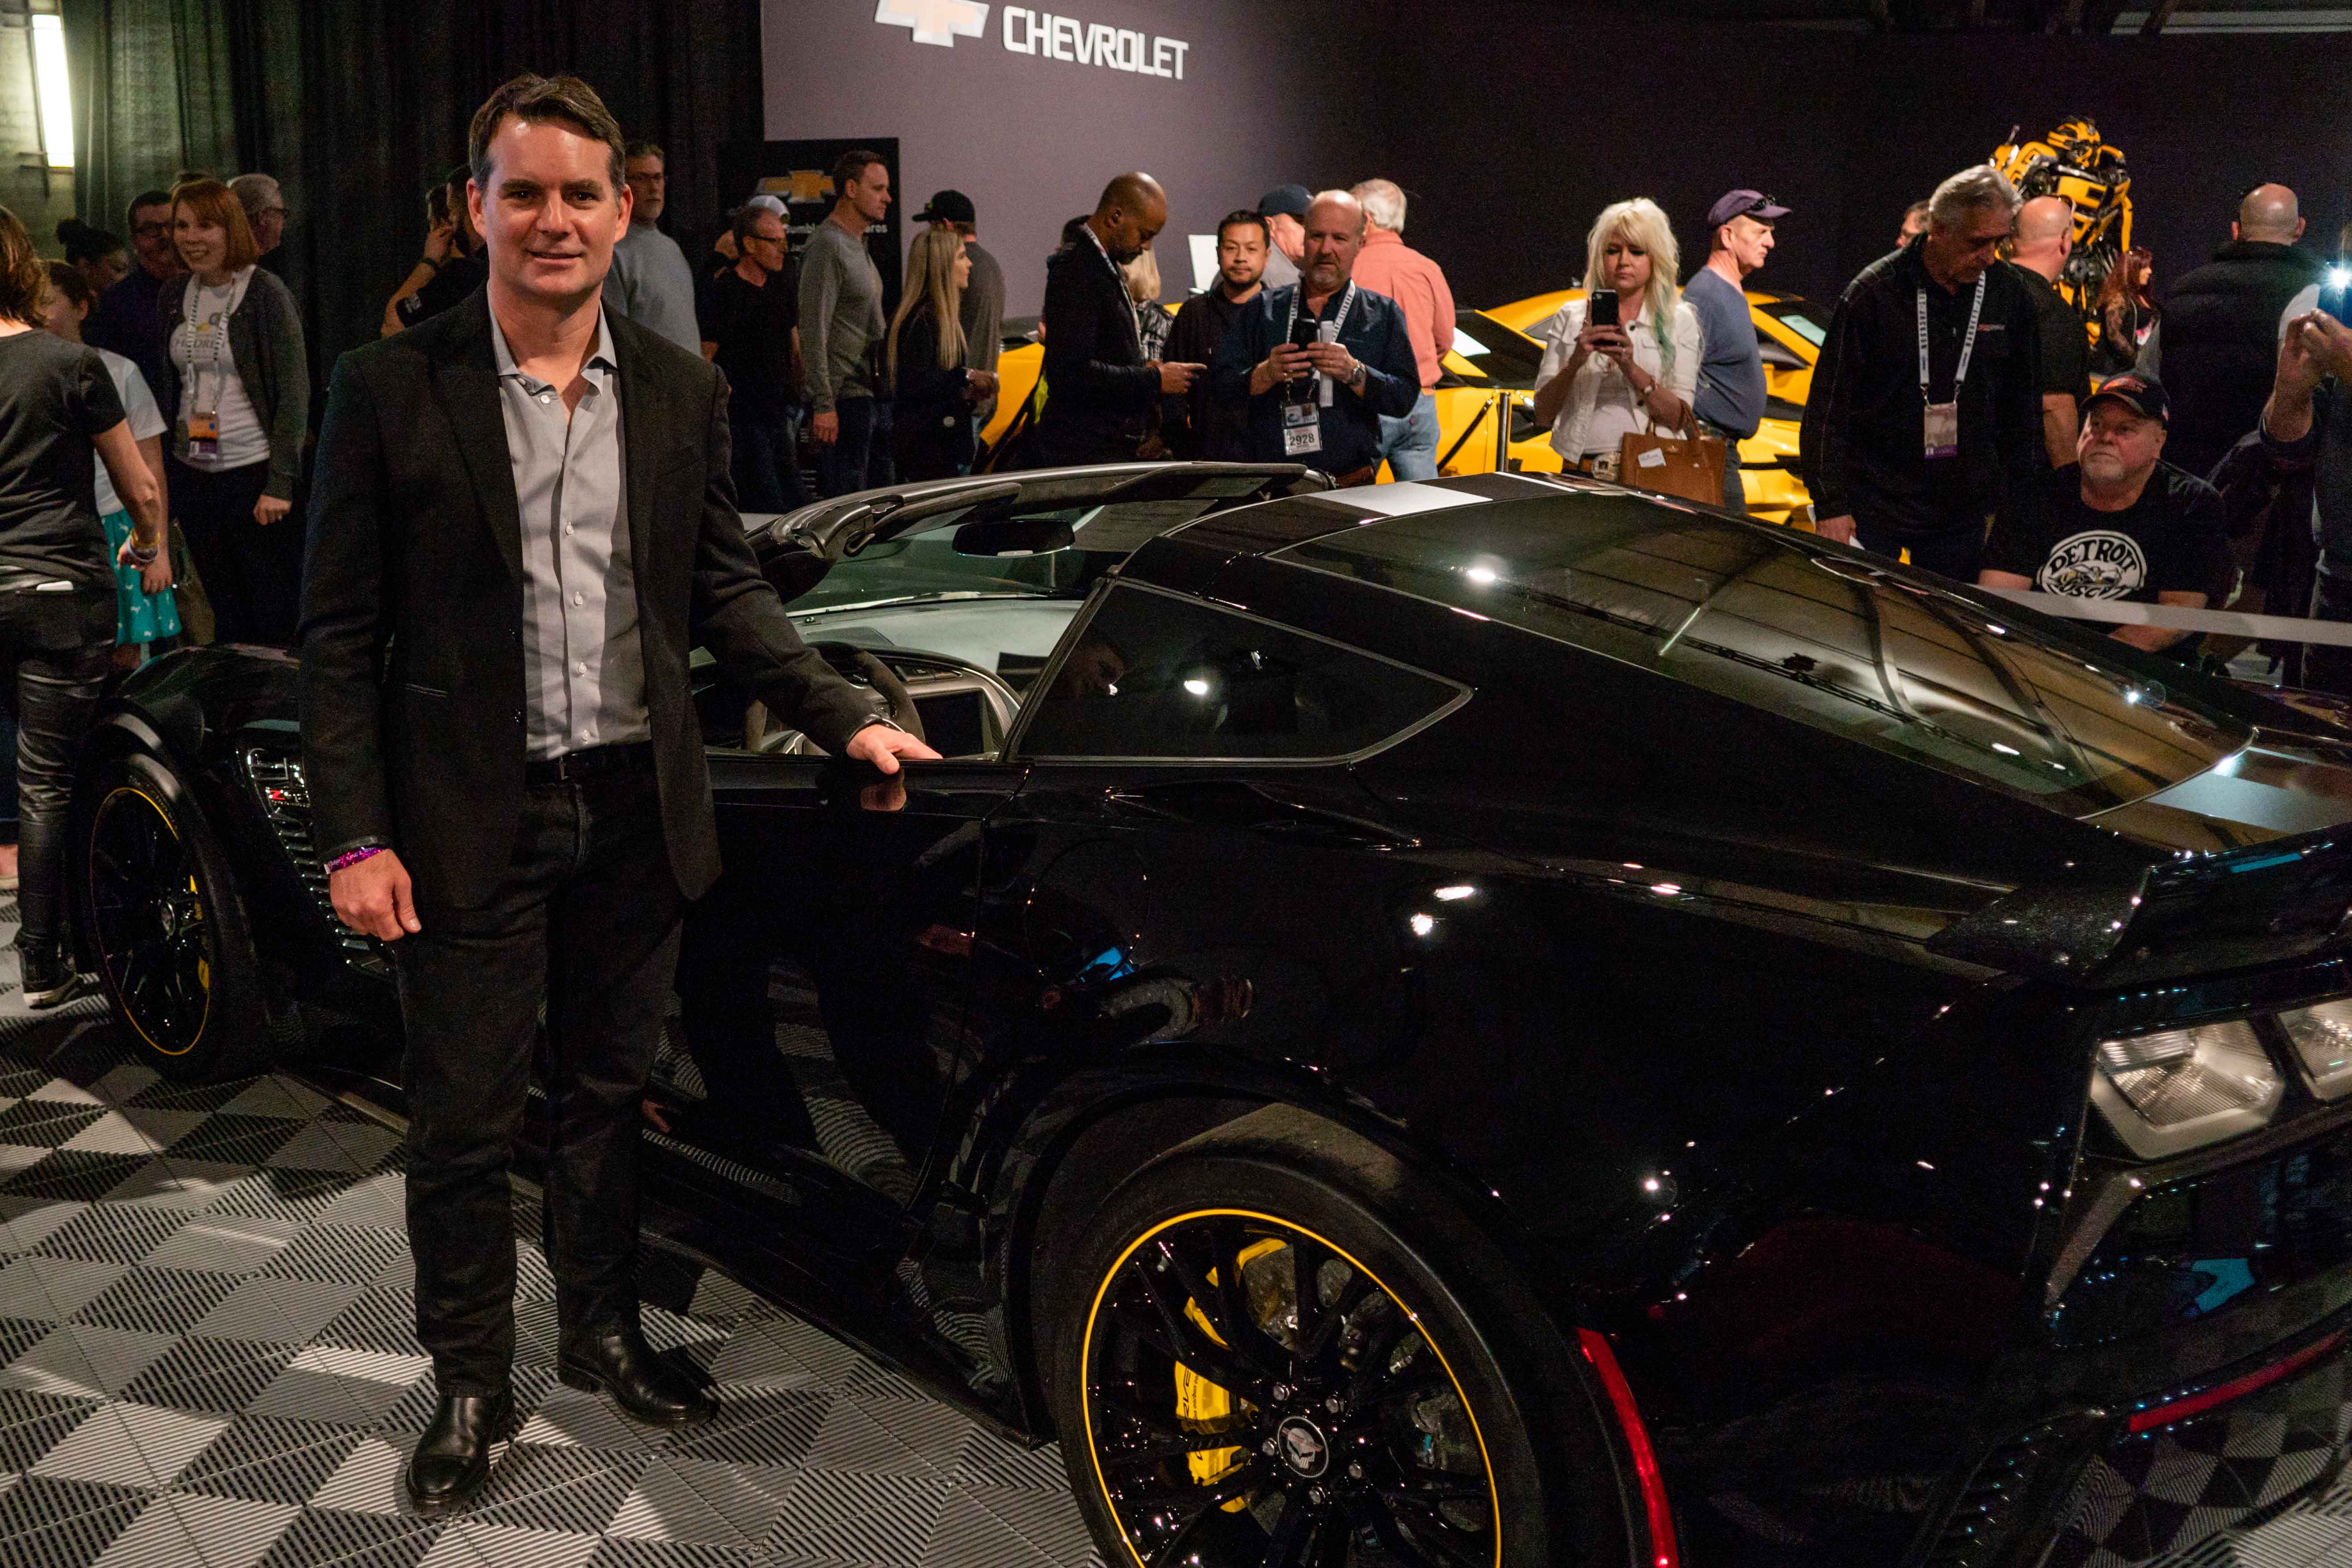 Retired NASCAR driver Jeff Gordon stands next to his 2016 Chevrolet Corvette CR.7 that raised $600,00 for charity at the annual Barrett-Jackson auction in Scottsdale, Arizona. | Rebecca Nguyen photos